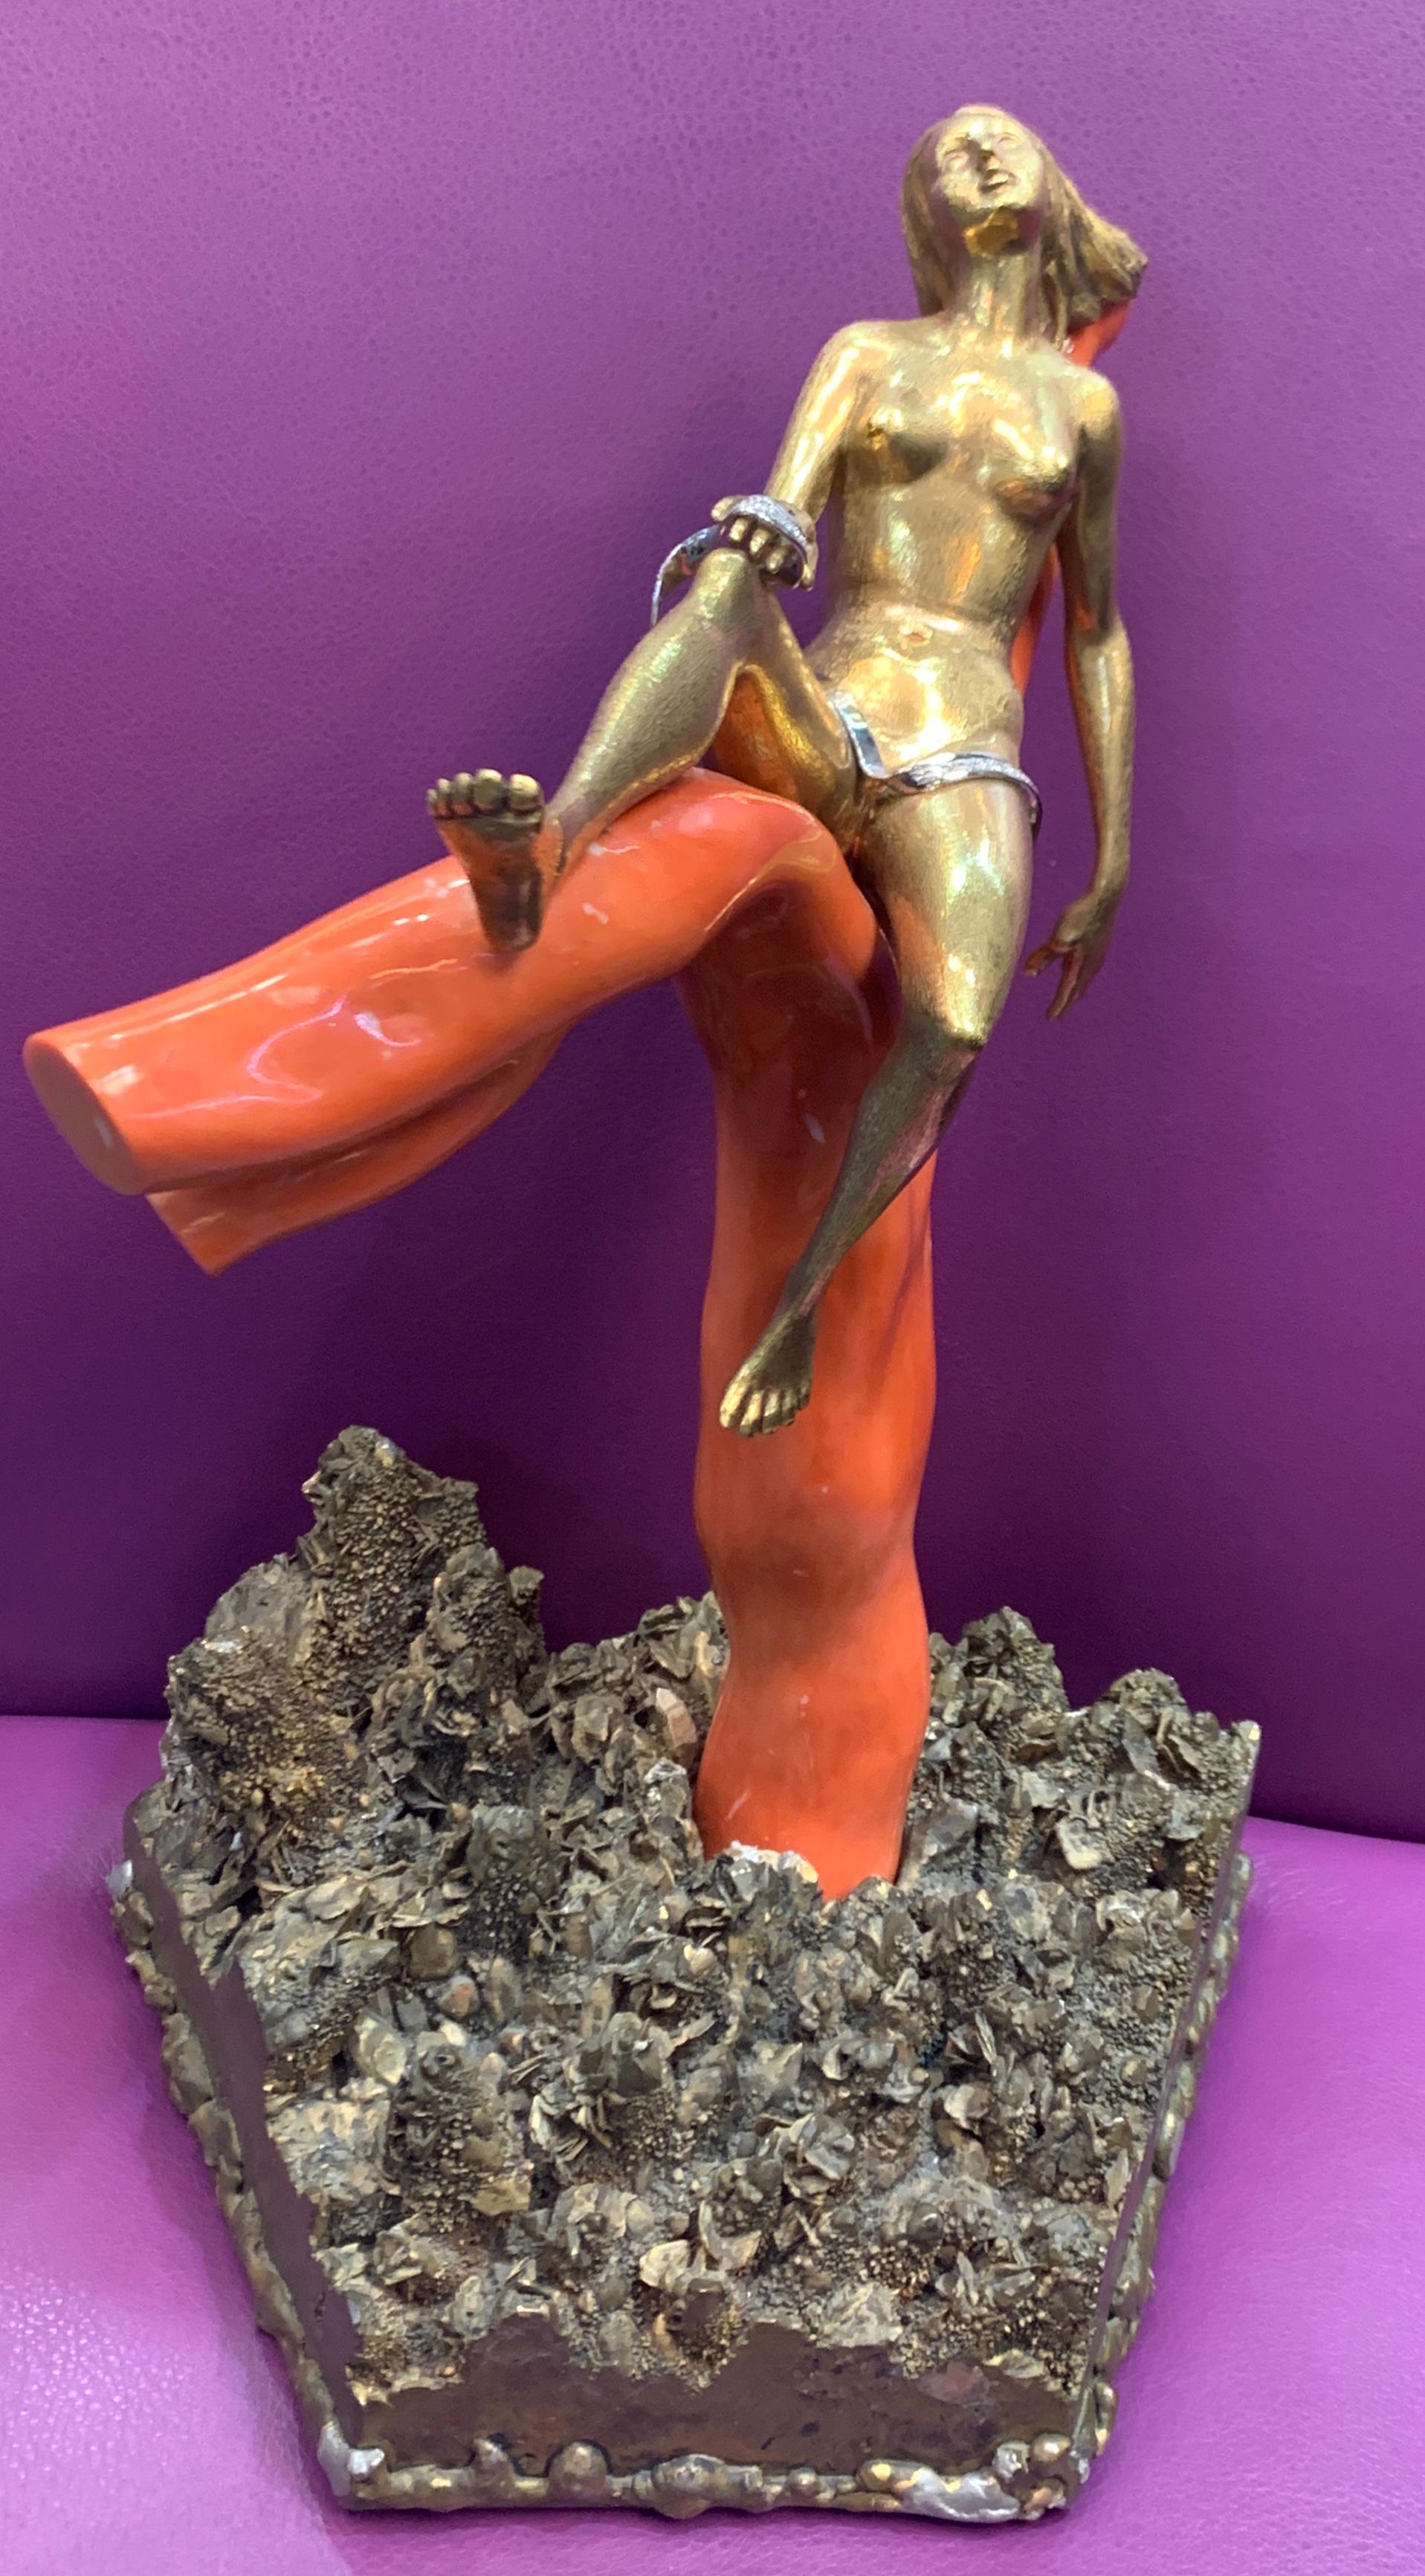 Gold & Coral Resting Lady Object By Romolo Grassi
The Lady is 18k Yellow Gold on one very fine solid coral.
Accented with diamonds and mounted on quartz
Gold Gram Weight: 766.7 grams
Coral Gram Weight: 877.3 grams
Measurements: 1 foot high
Published